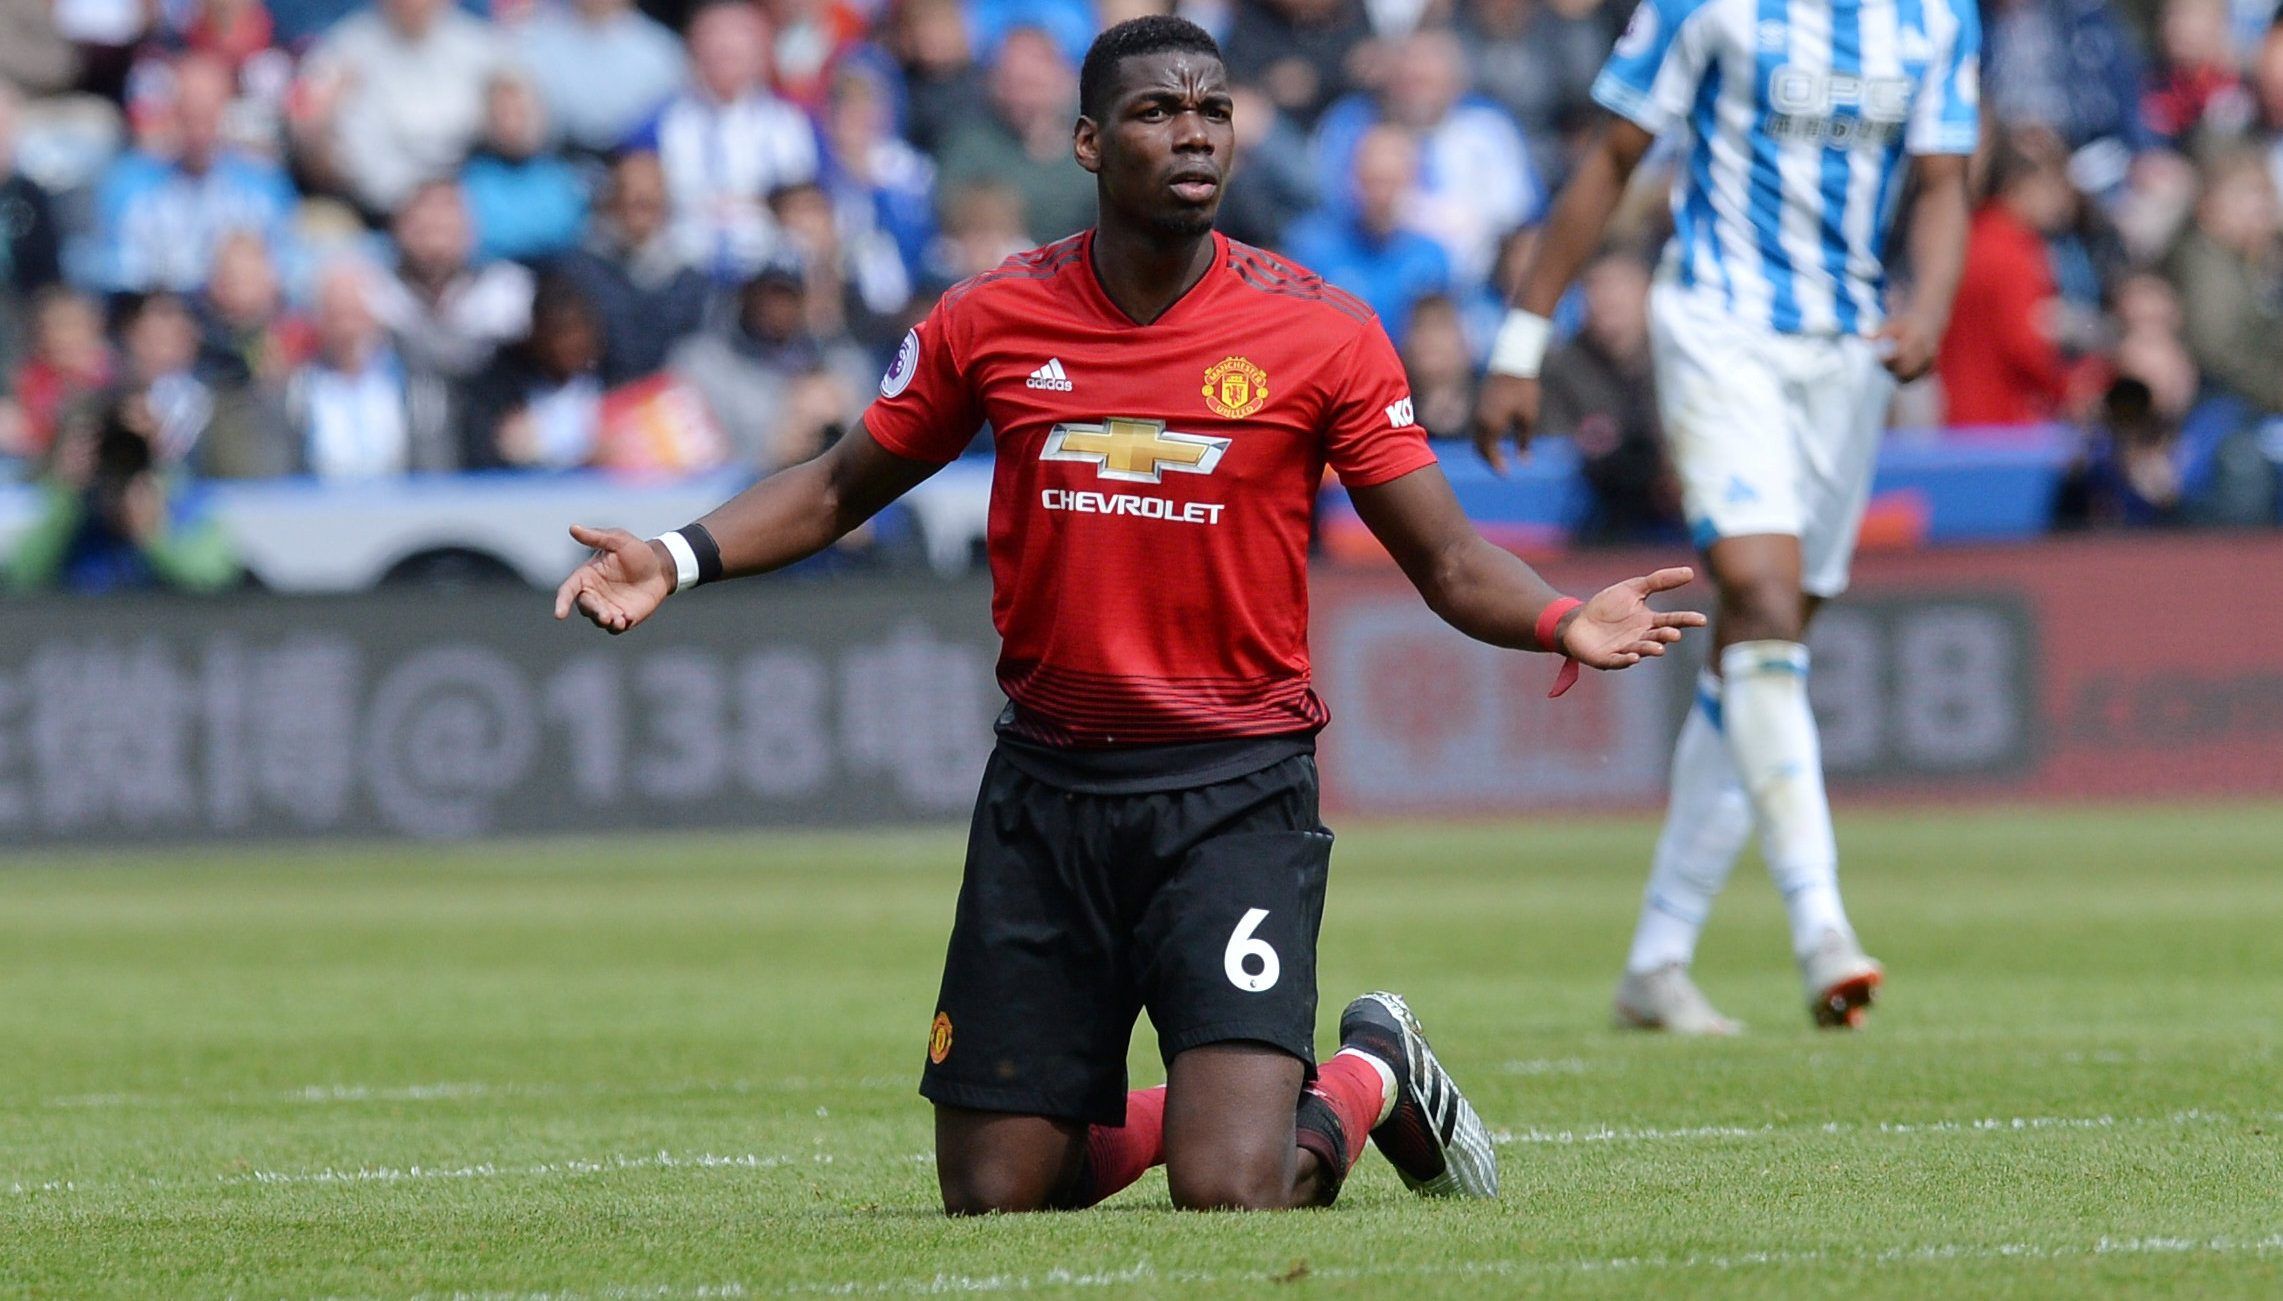 Soccer Football - Premier League - Huddersfield Town v Manchester United - John Smith's Stadium, Huddersfield, Britain - May 5, 2019  Manchester United's Paul Pogba reacts during the match      REUTERS/Peter Powell  EDITORIAL USE ONLY. No use with unauthorized audio, video, data, fixture lists, club/league logos or 